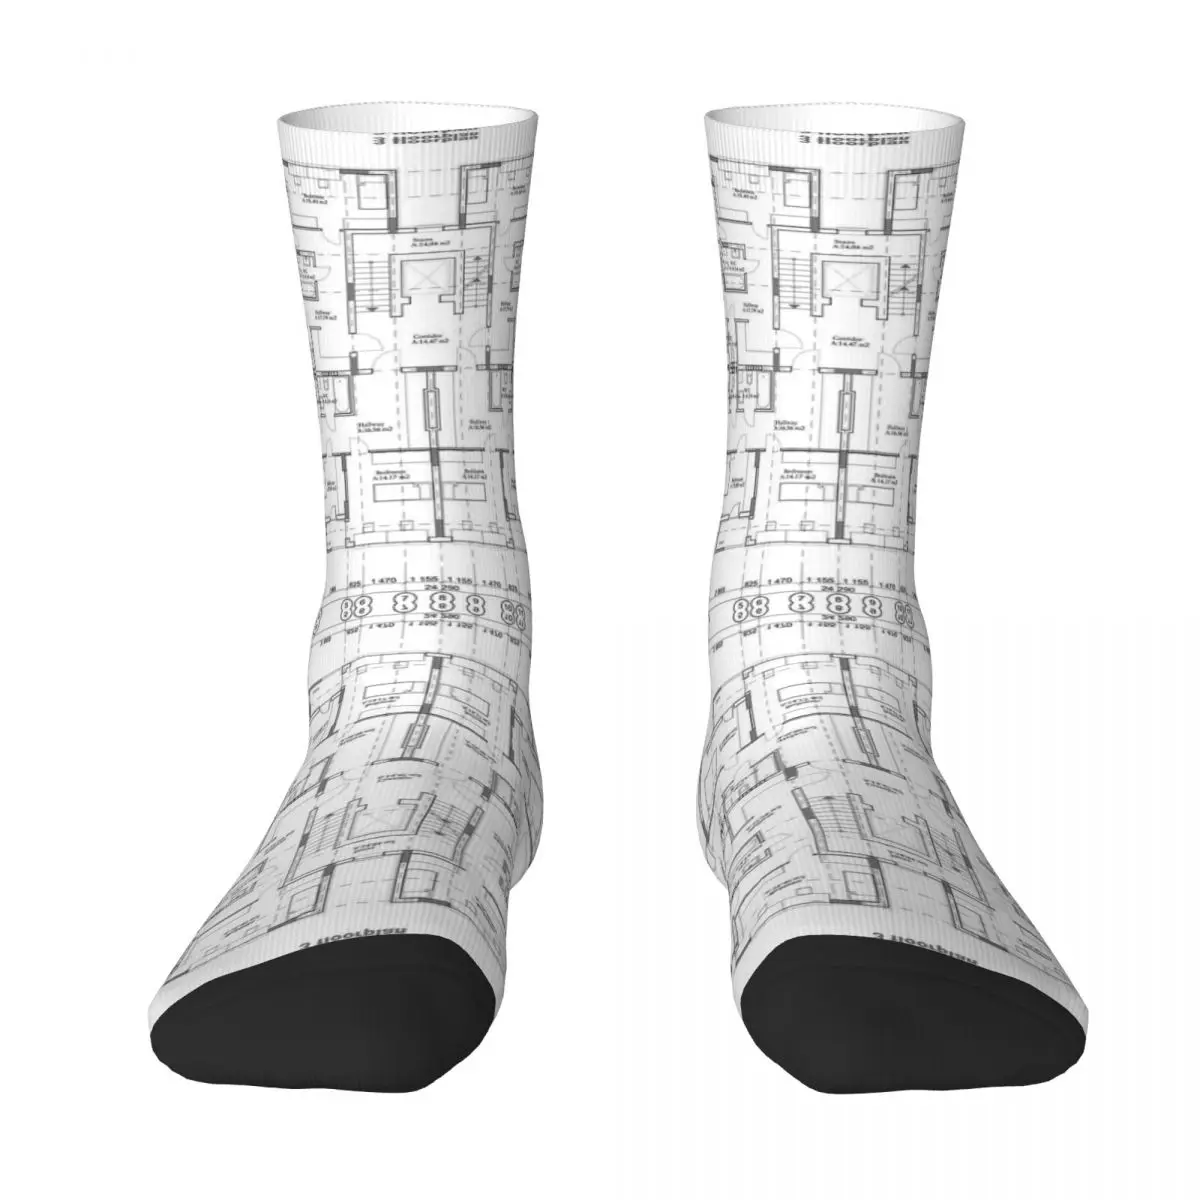 

Detailed Architectural One Story Private House Blueprints And Drawings Socks Soft Stockings All Season Long Socks for Man Woman